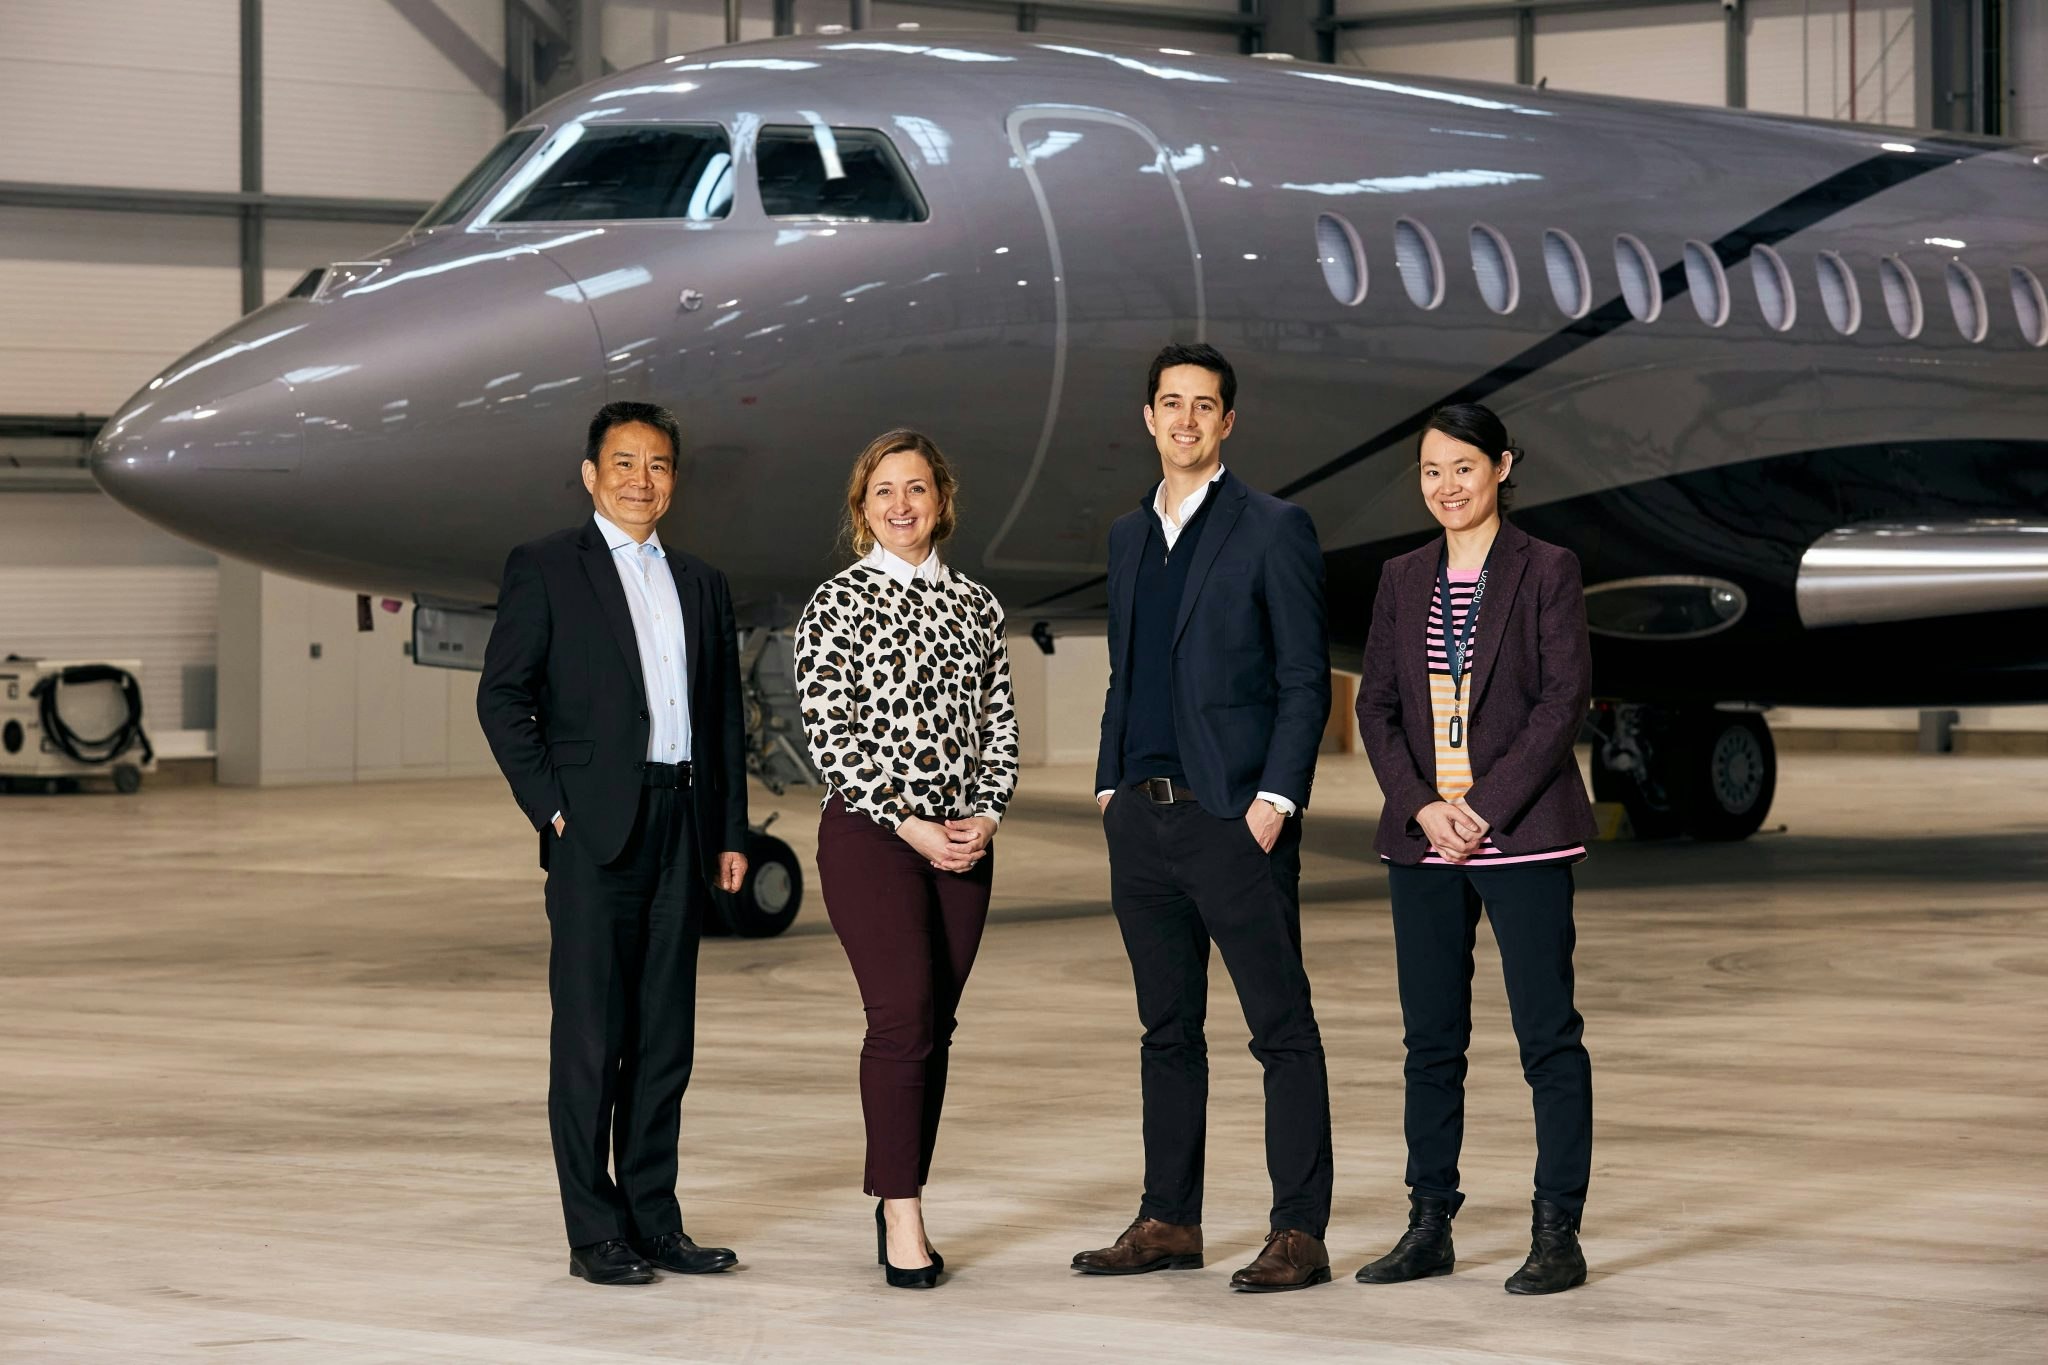 A landscape photo of four people standing in front of a grey private jet in a hangar